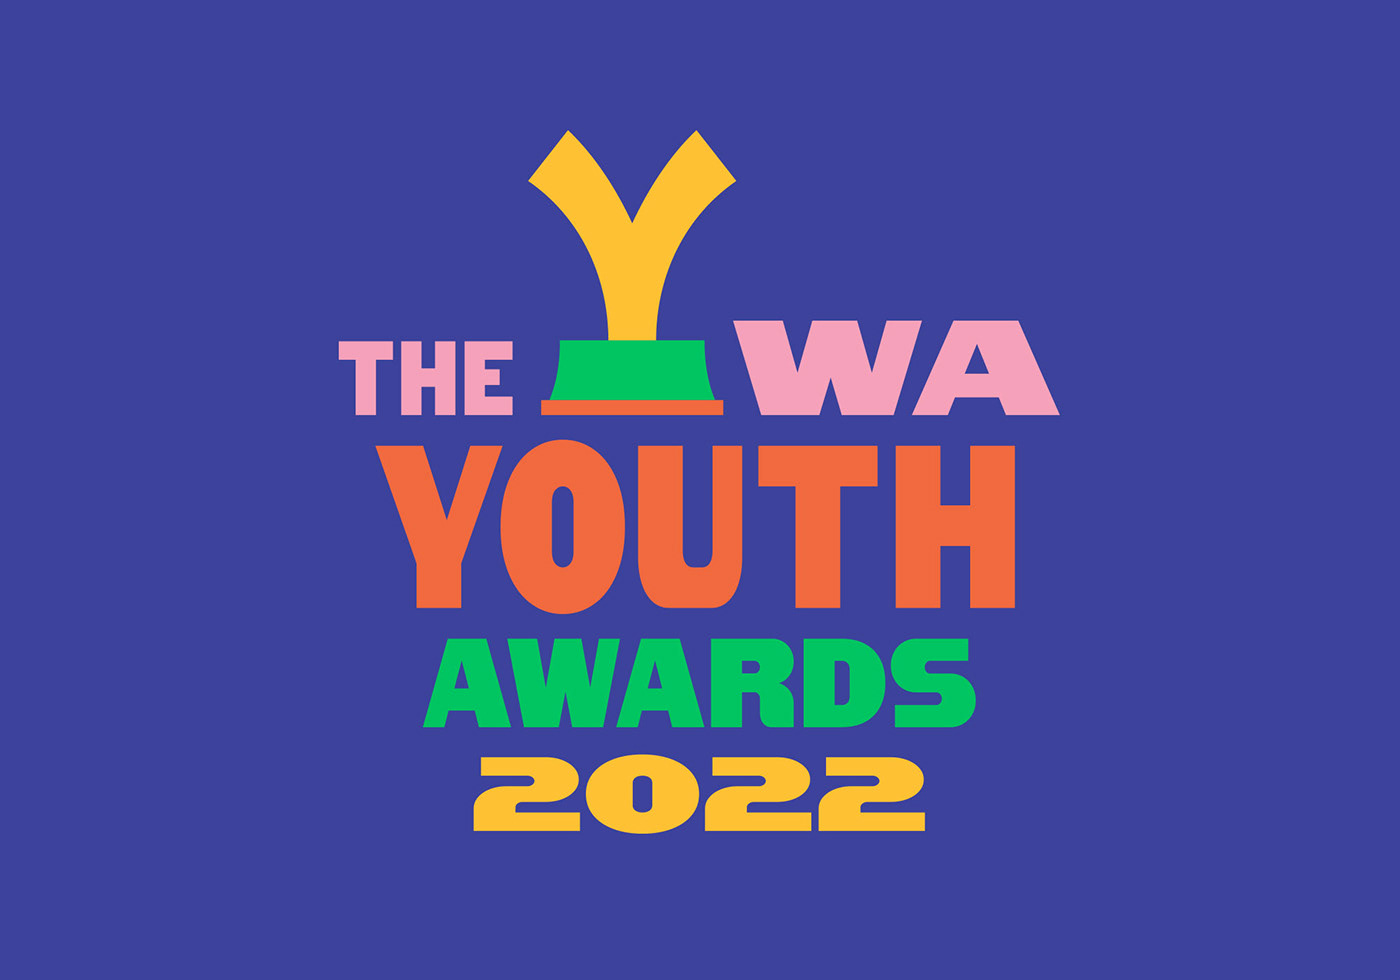 Australia Awards Colourful  people perth trophy western australia youth